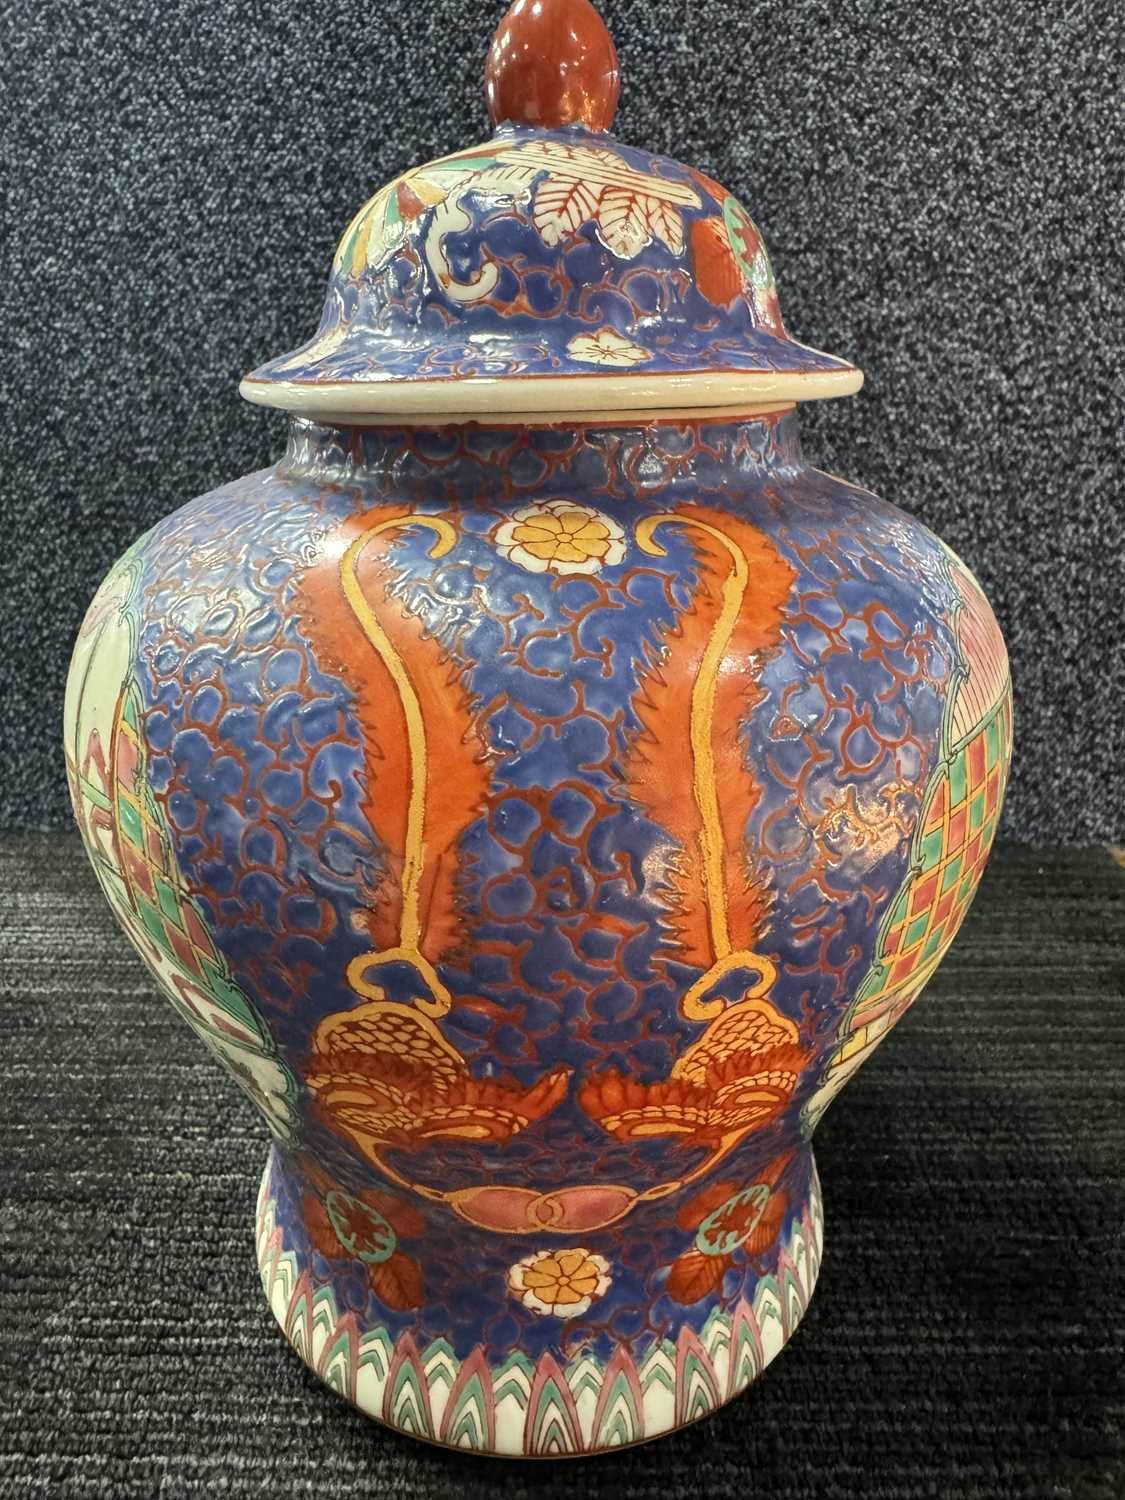 PAIR OF CHINESE FIGURAL VASES, EARLY 20TH CENTURY - Image 4 of 16